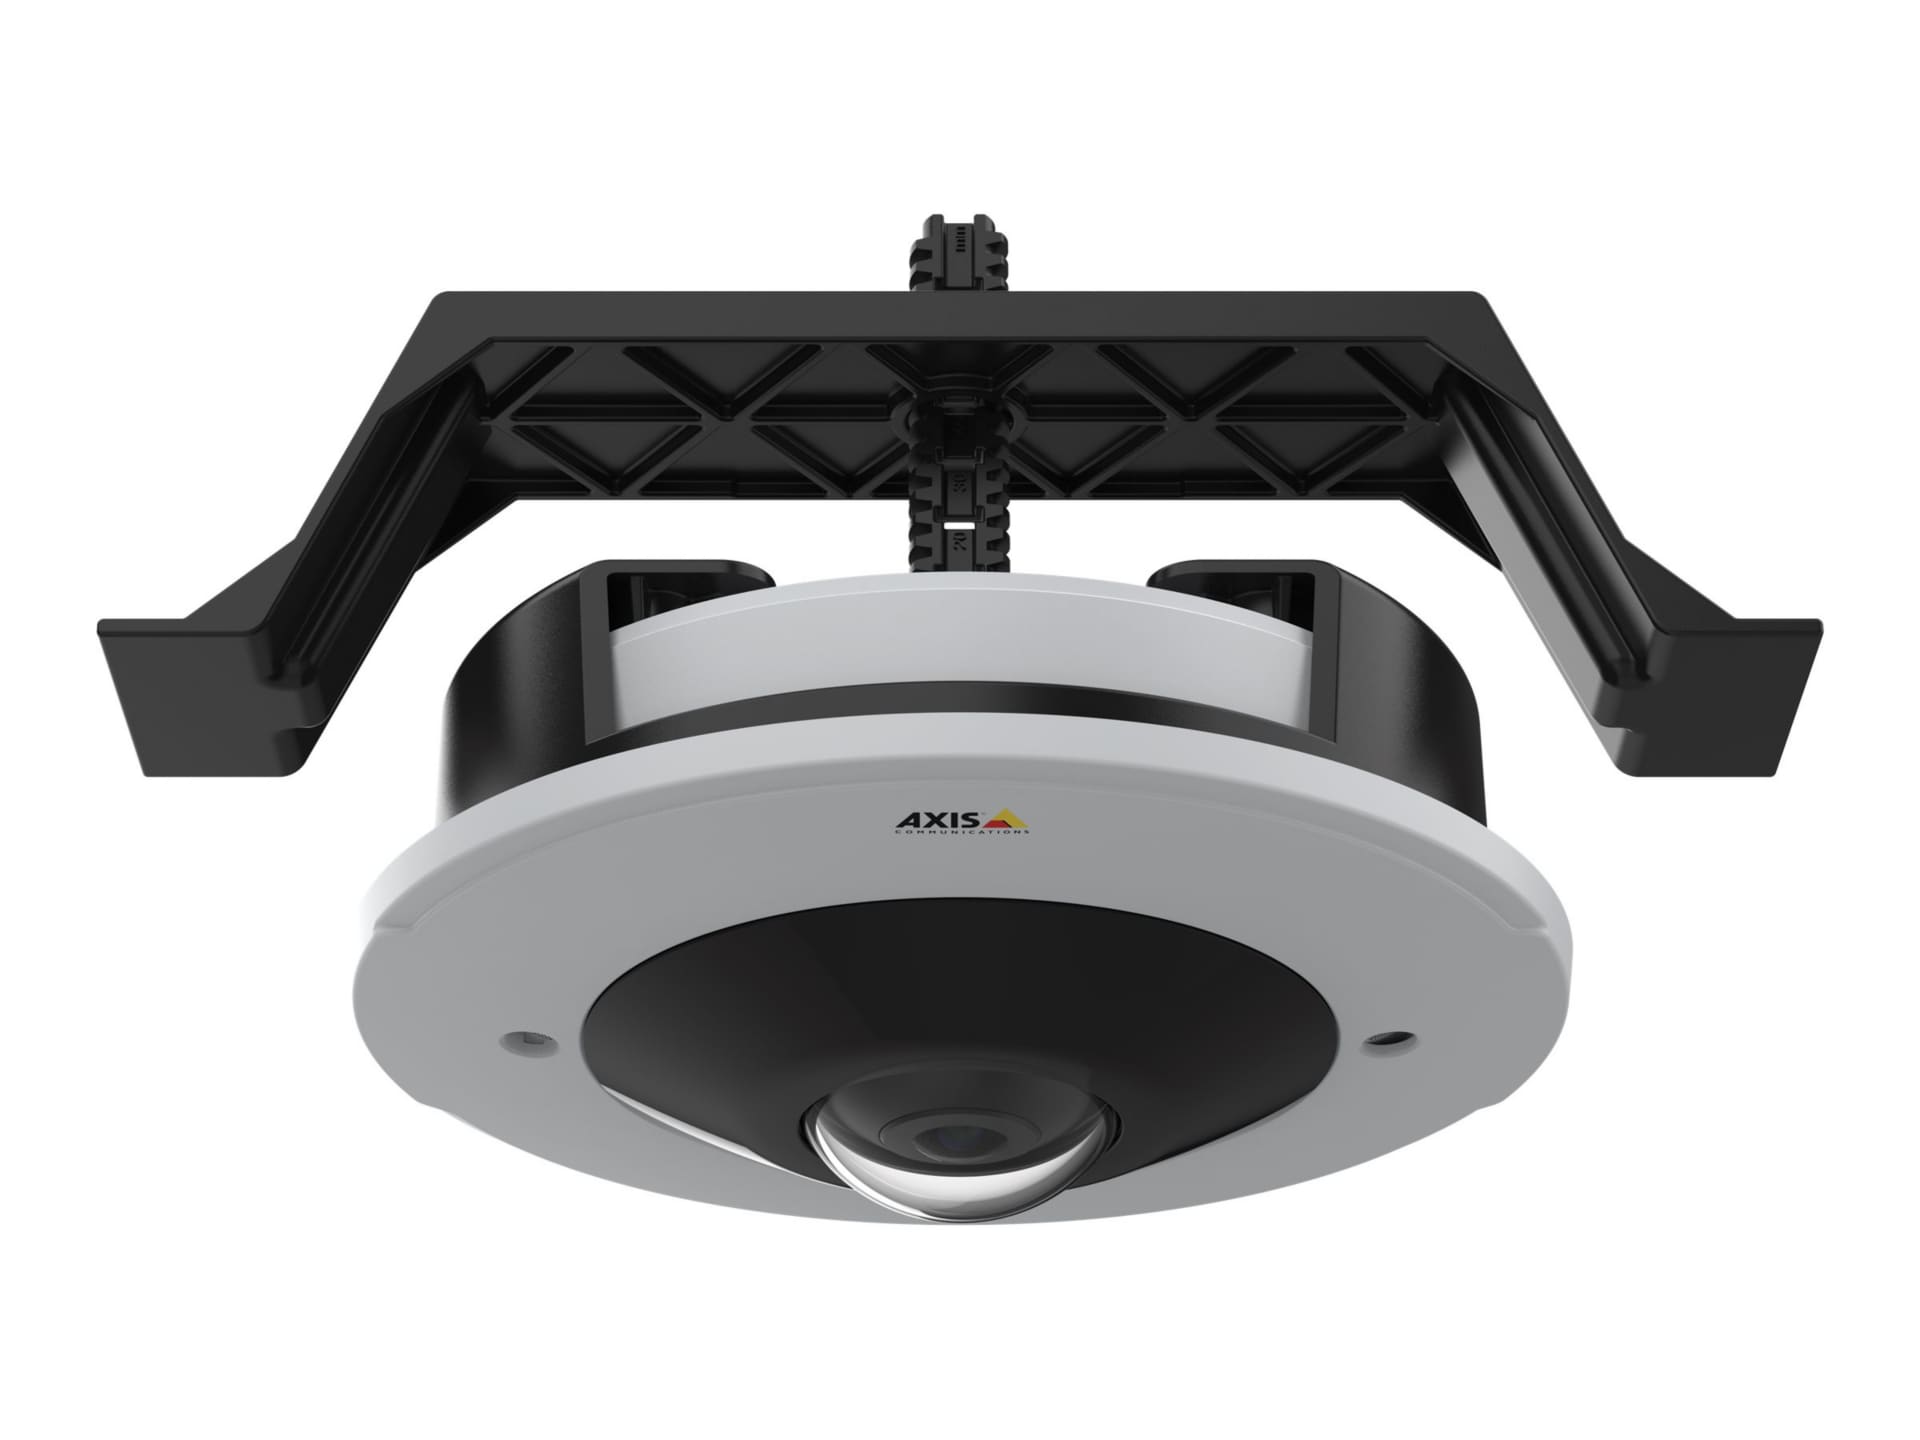 AXIS tm3208 - camera dome recessed mount